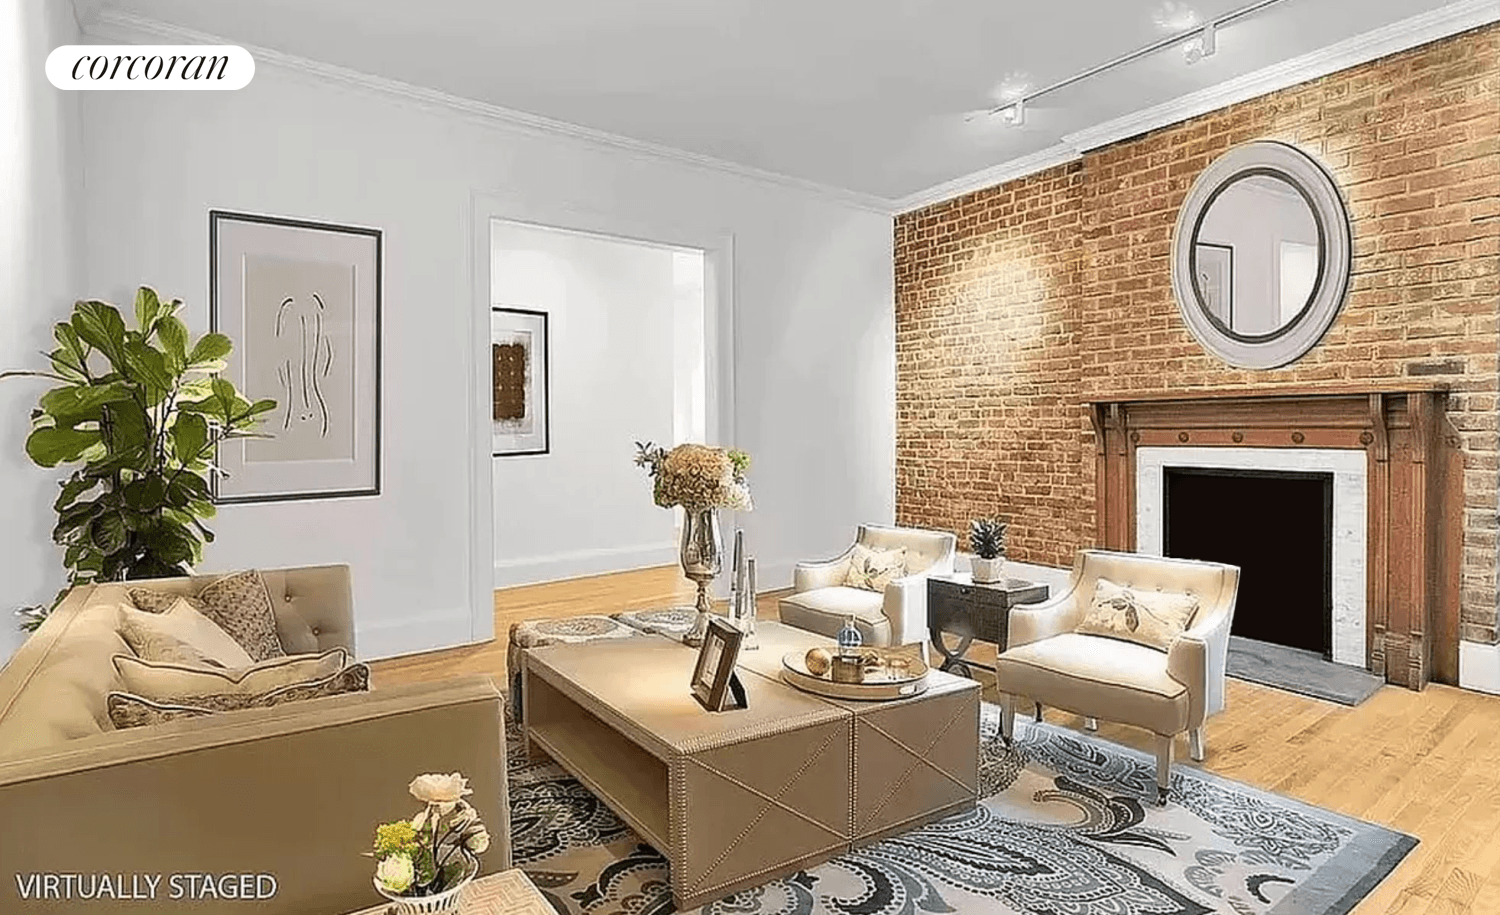 Located just off Madison Avenue and East 83rd Street on The Upper East side, this one bedroom garden apartment is in an impeccably maintained 19th century elevator townhouse on a ...